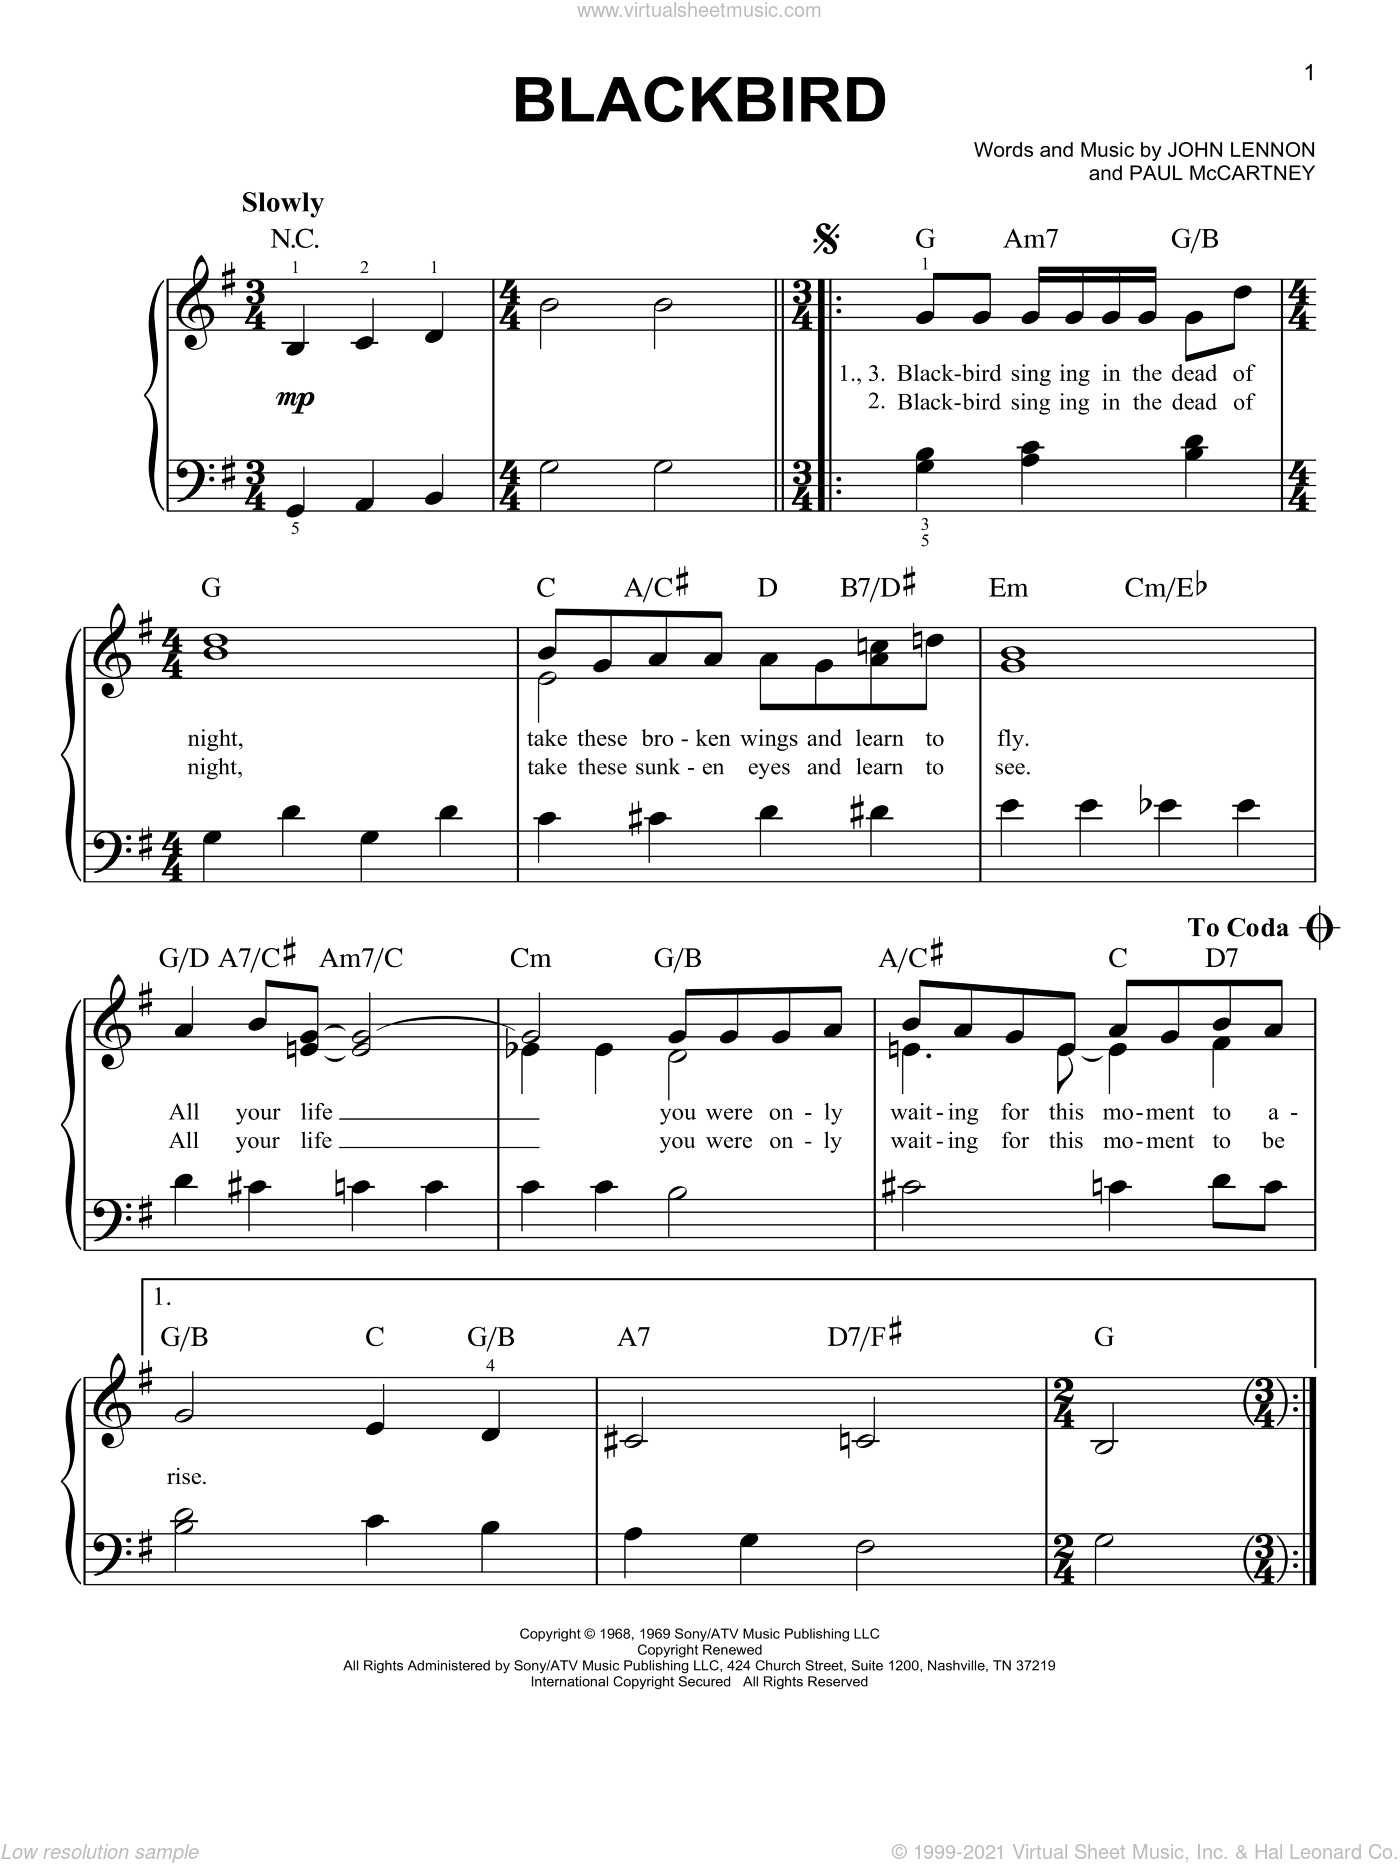 Two of Us" Sheet Music by The Beatles for Piano/Vocal/Chords